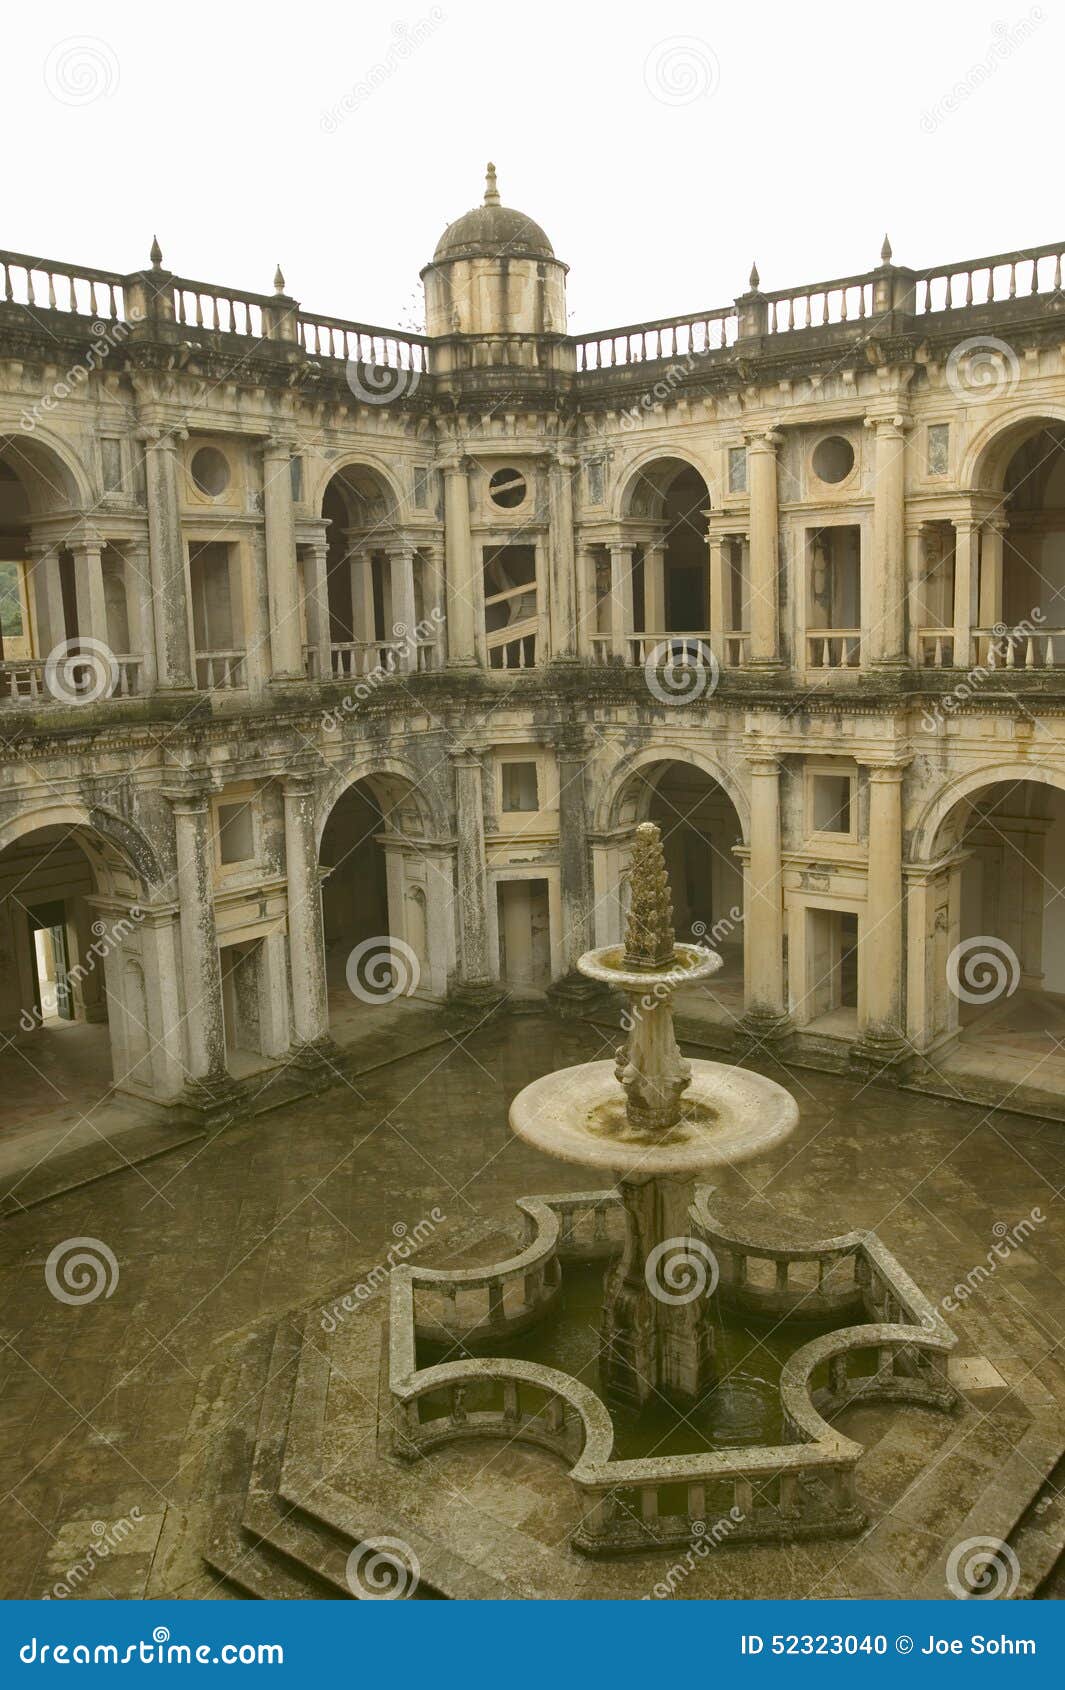 fountain in courtyard of convent of the knights of christ and the templar castle, founded by gualdim pais in 1160 ad, is a unesco